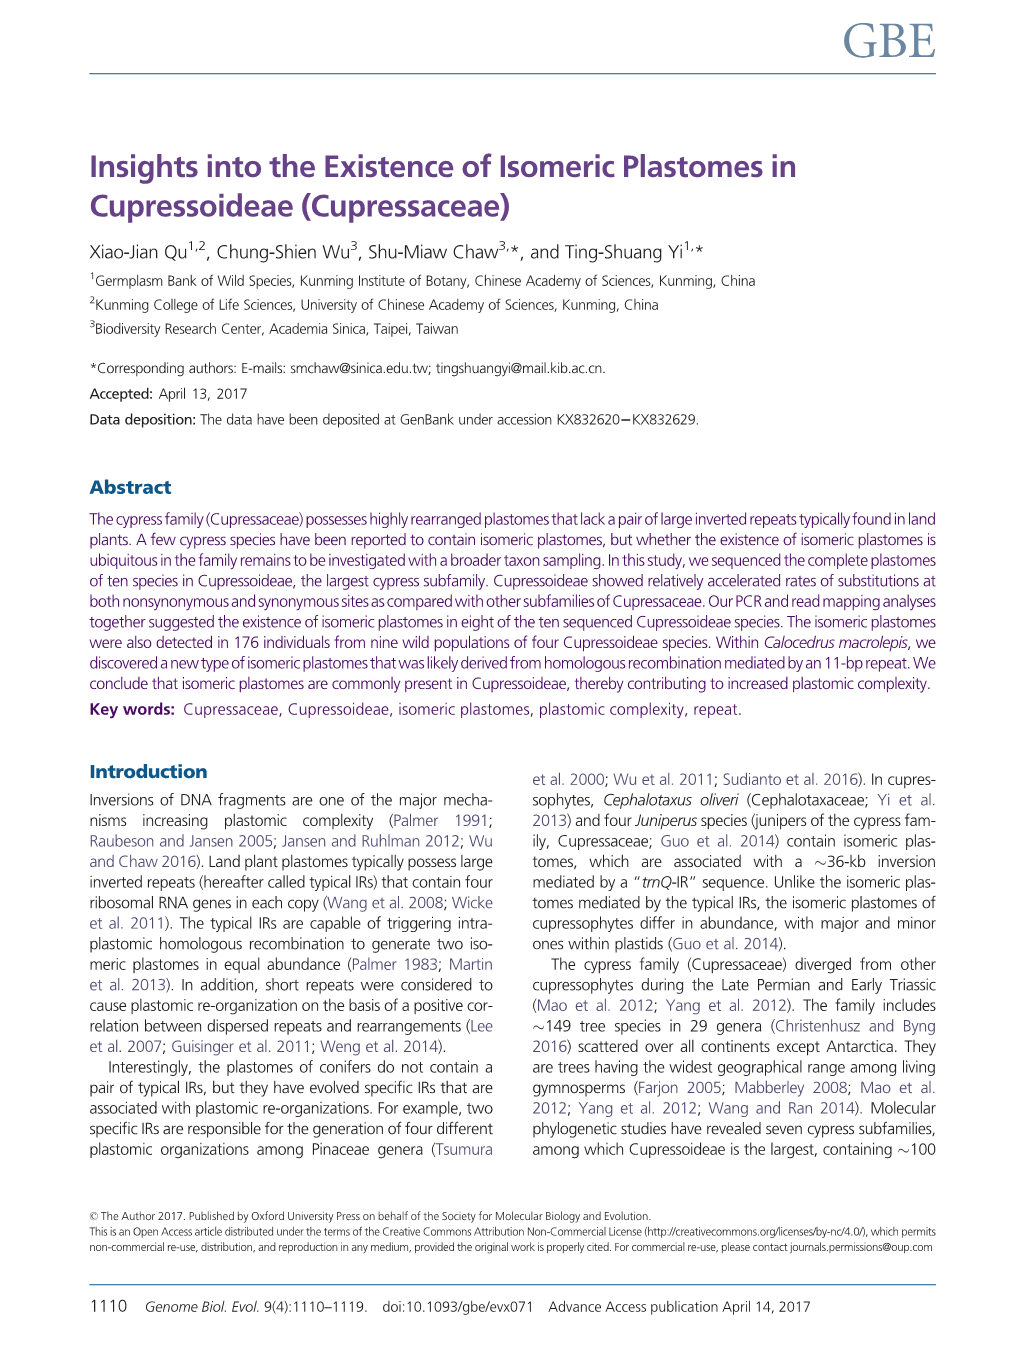 Insights Into the Existence of Isomeric Plastomes in Cupressoideae (Cupressaceae)